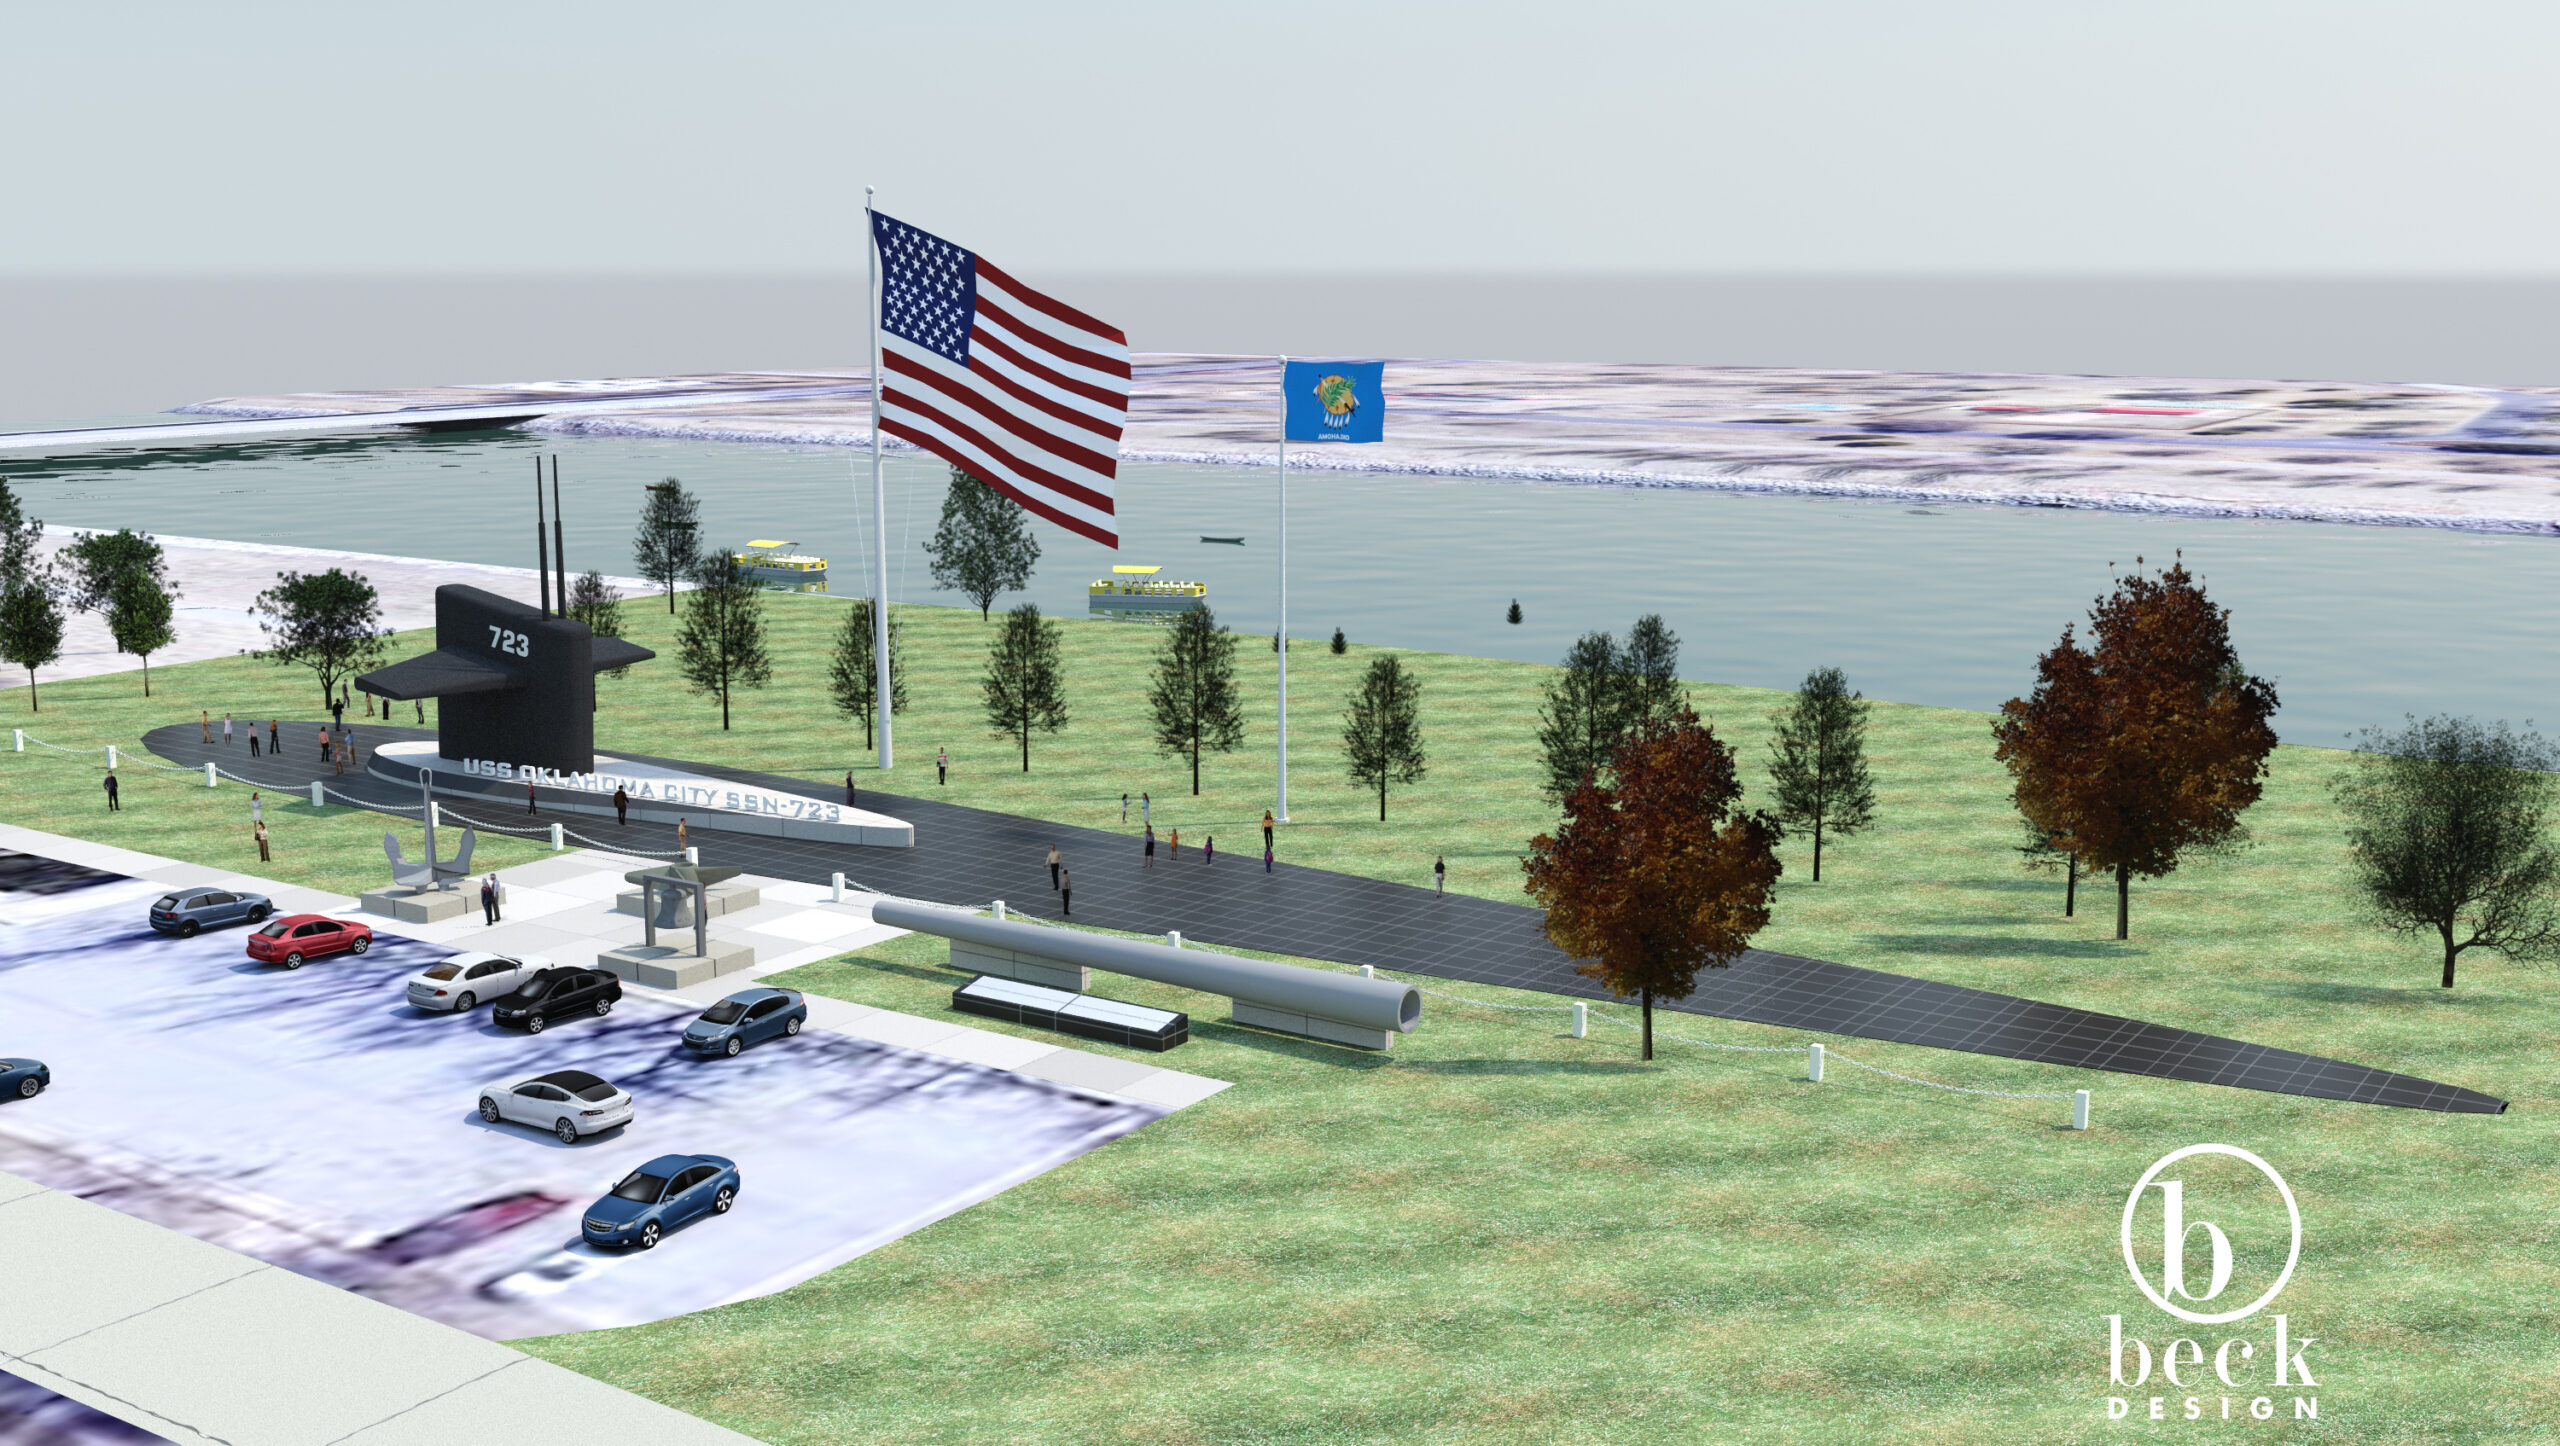 Maritime Display Planned in OKC Park Along Oklahoma River